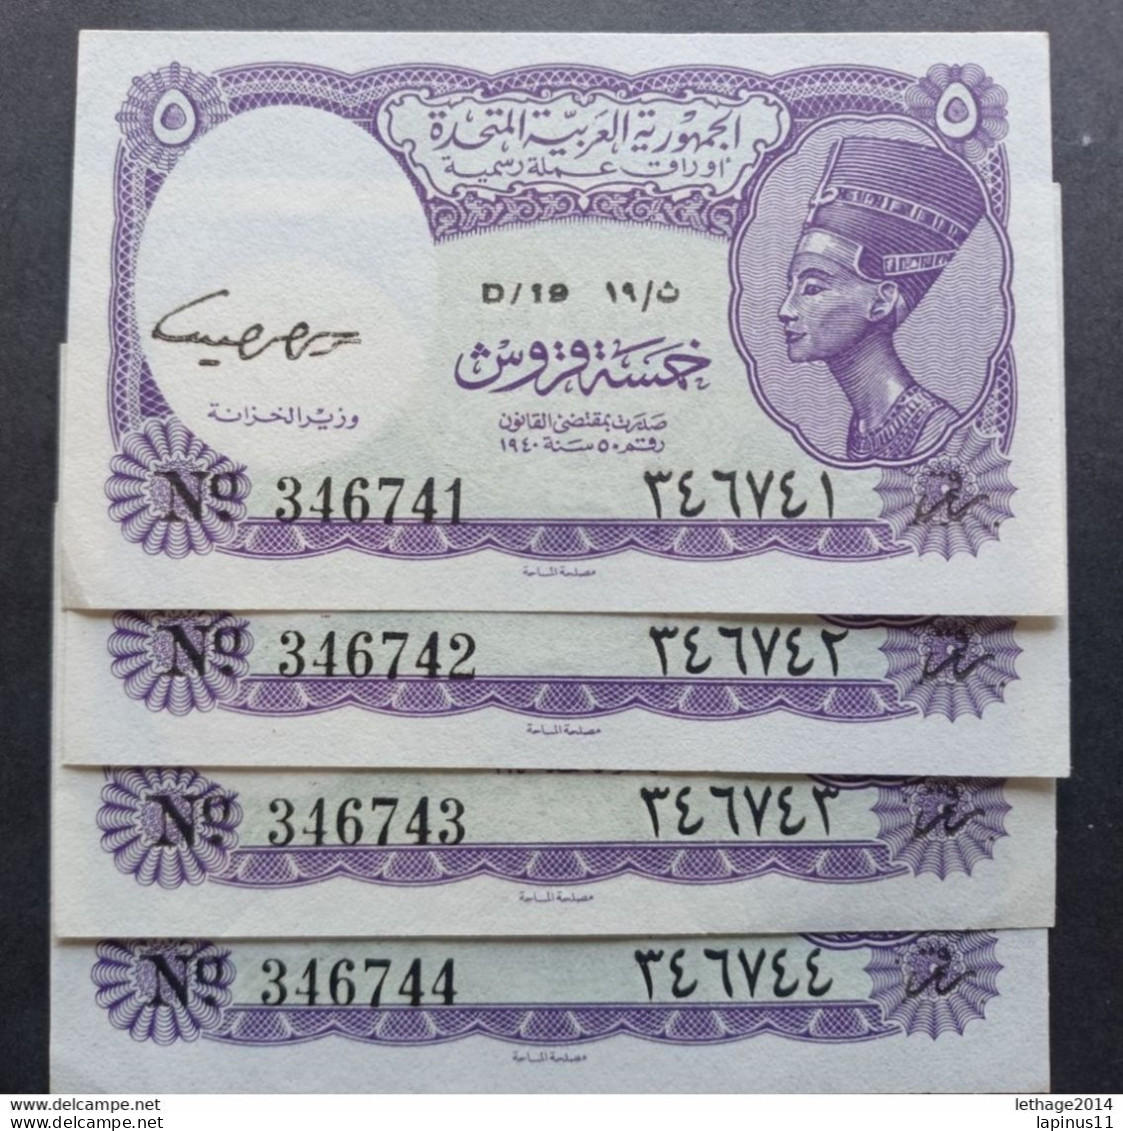 BANKNOTE EGITTO 5 P 1940 UNCIRCULATED SEQUENTIAL NUMBERS PARTIAL SIGNATURE DECAL 4 ERROR NUMBER 4 SERIAL BROKEN - Egypt